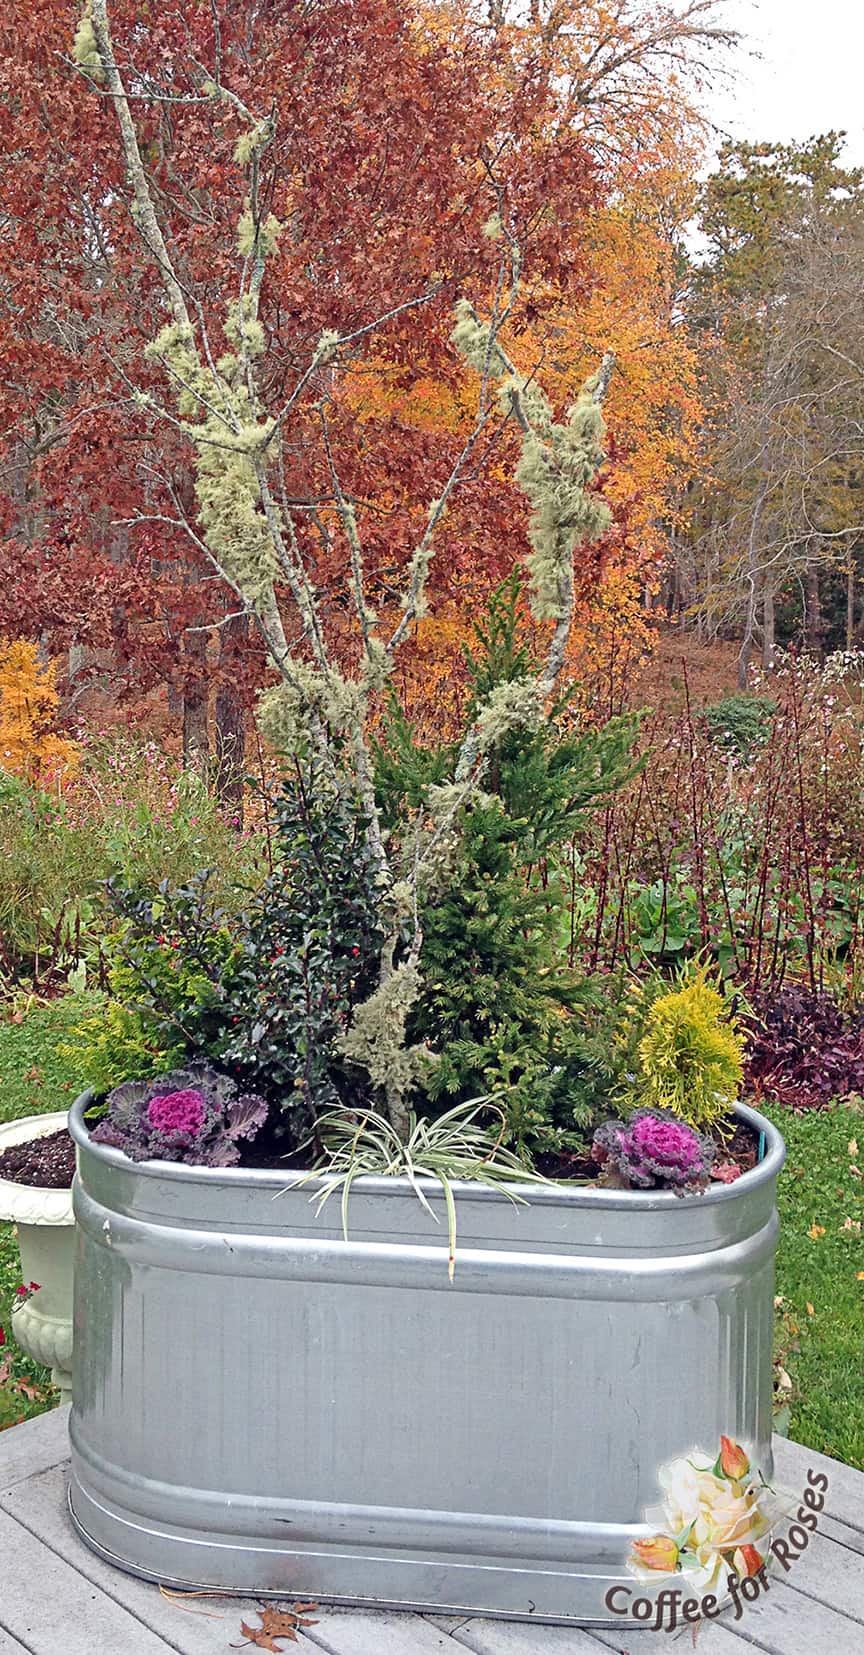 In the fall I planted this trough with assorted dwarf evergreens, a couple of ornamental kale and a variegated Carex. I also stuck in some lichen-covered branches for height, and because I love lichen. But what you can't see is that on all sides of these evergreens I placed tulip bulbs. These plants and sticks pleased me all winter long.